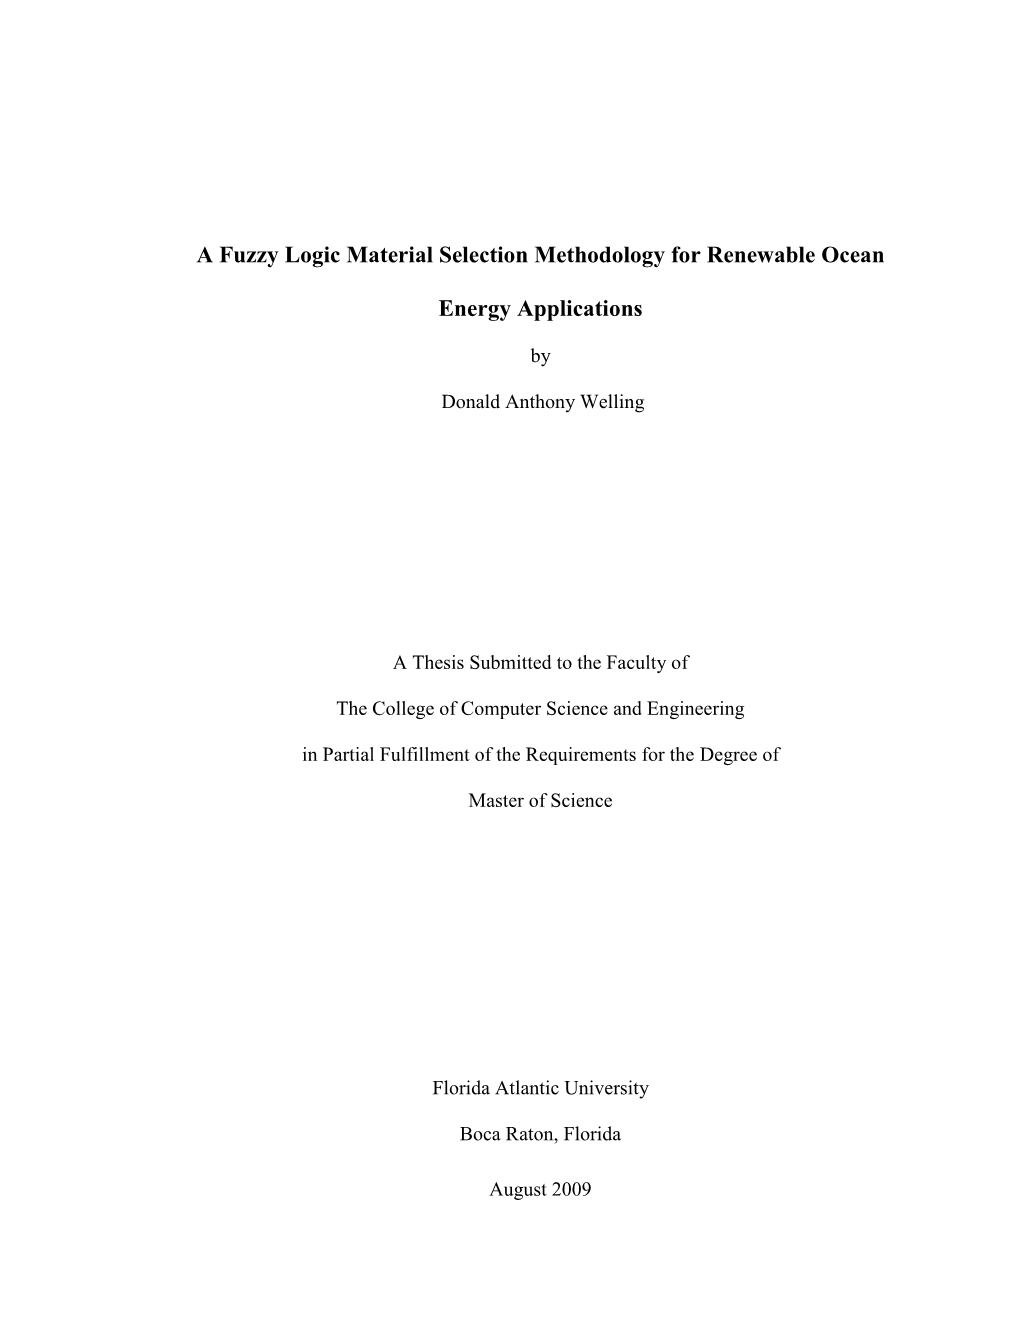 A Fuzzy Logic Material Selection Methodology for Renewable Ocean